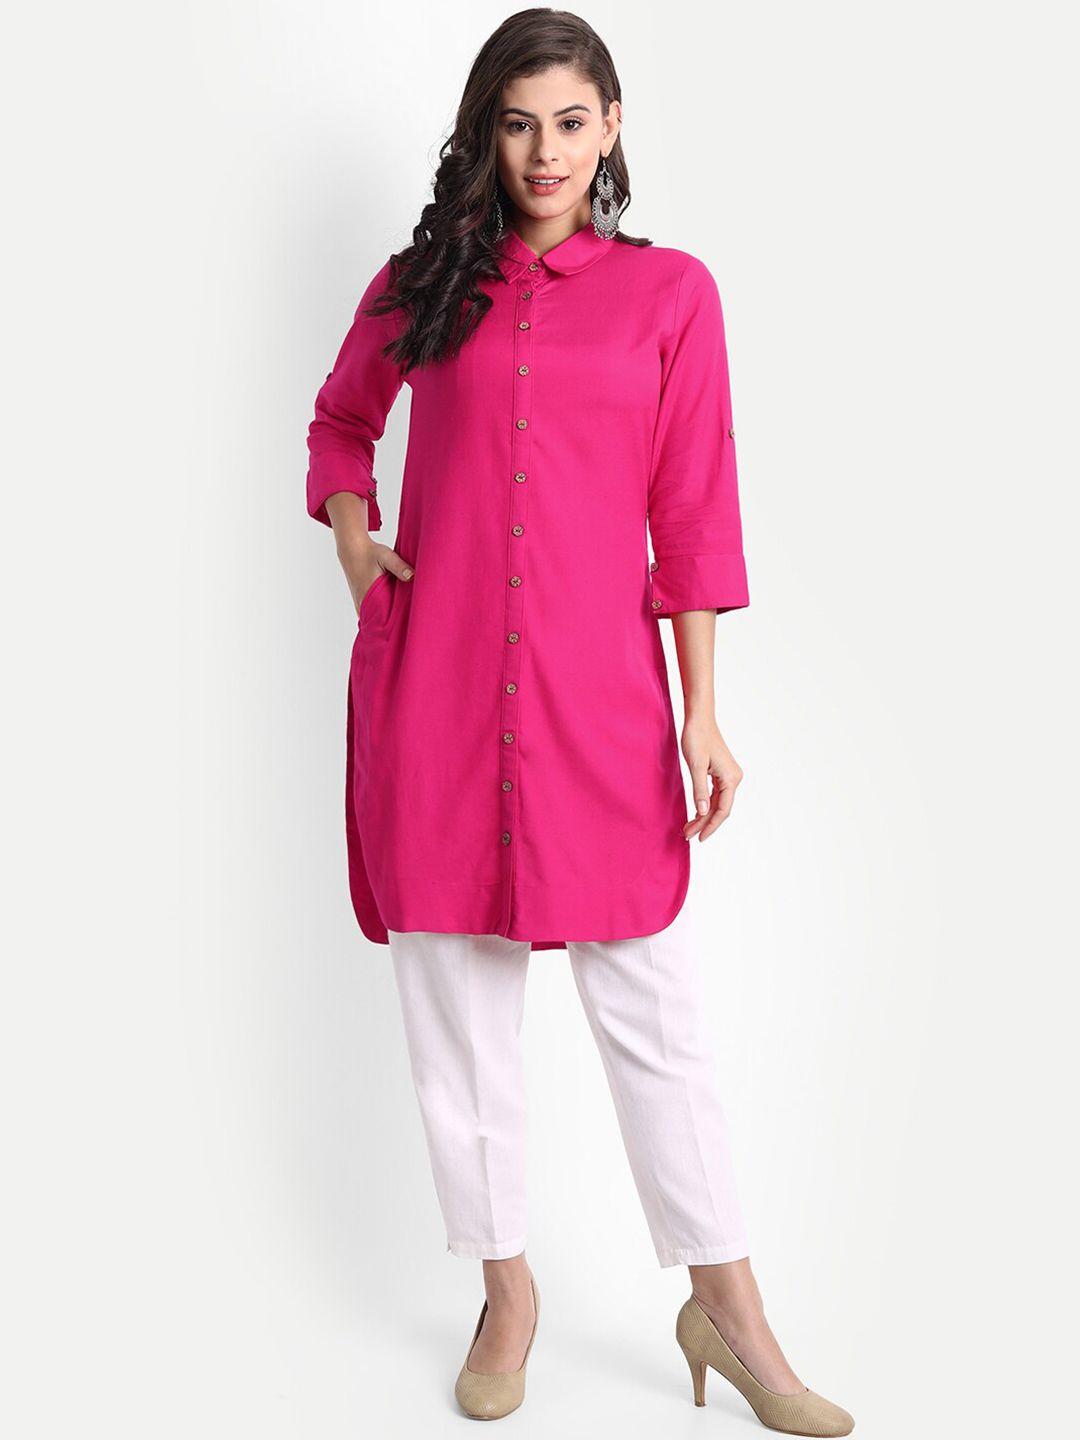 fabglobal women pink solid tunic